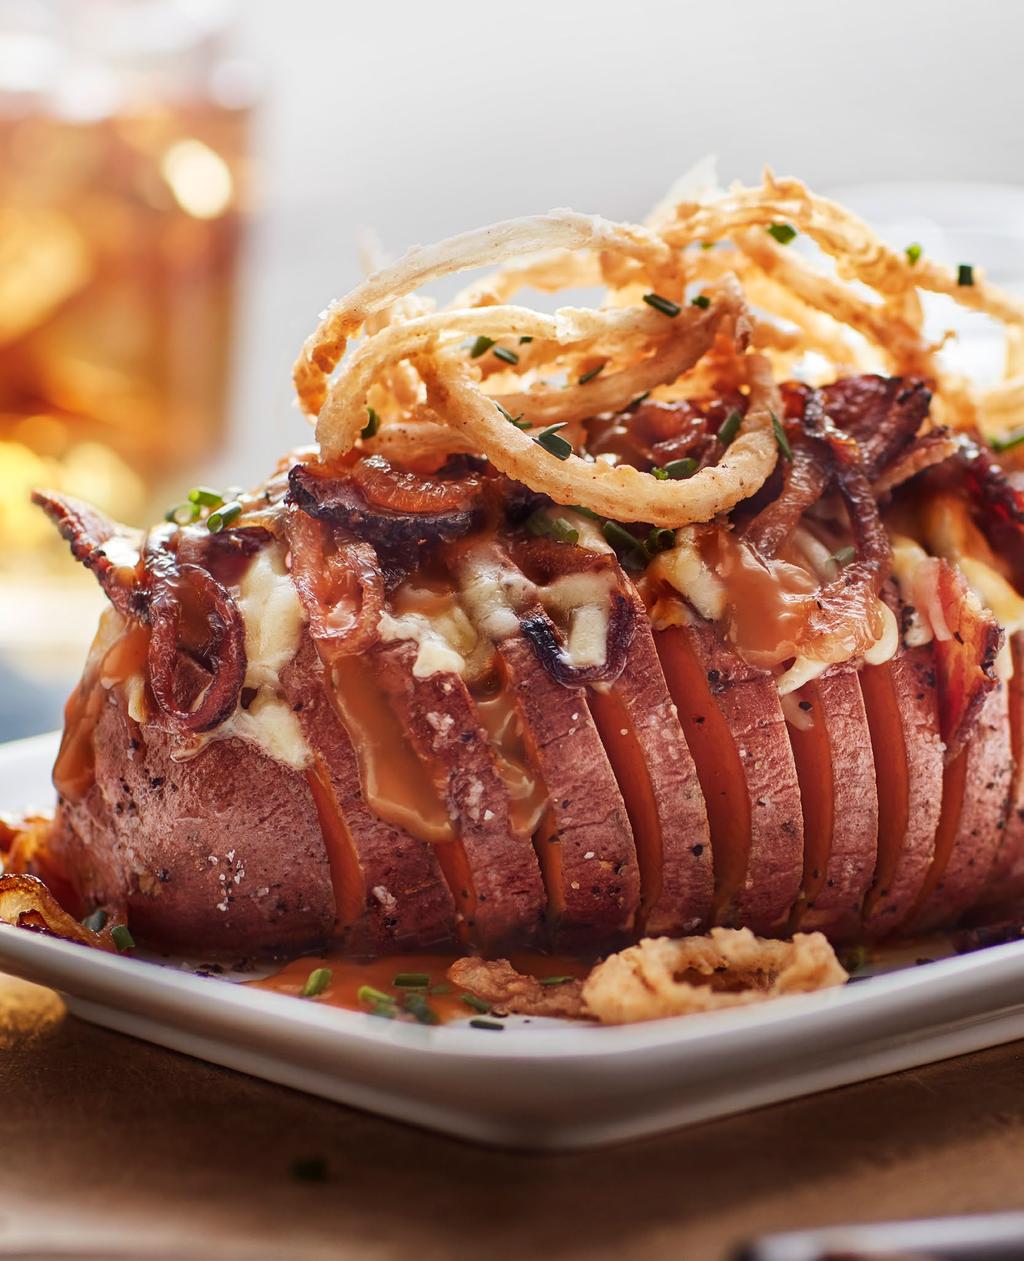 Maple Bacon Hasselback Potatoes SEEPED-DOWN FLAVOR Hasselback potato recipes are lighting up the Internet.